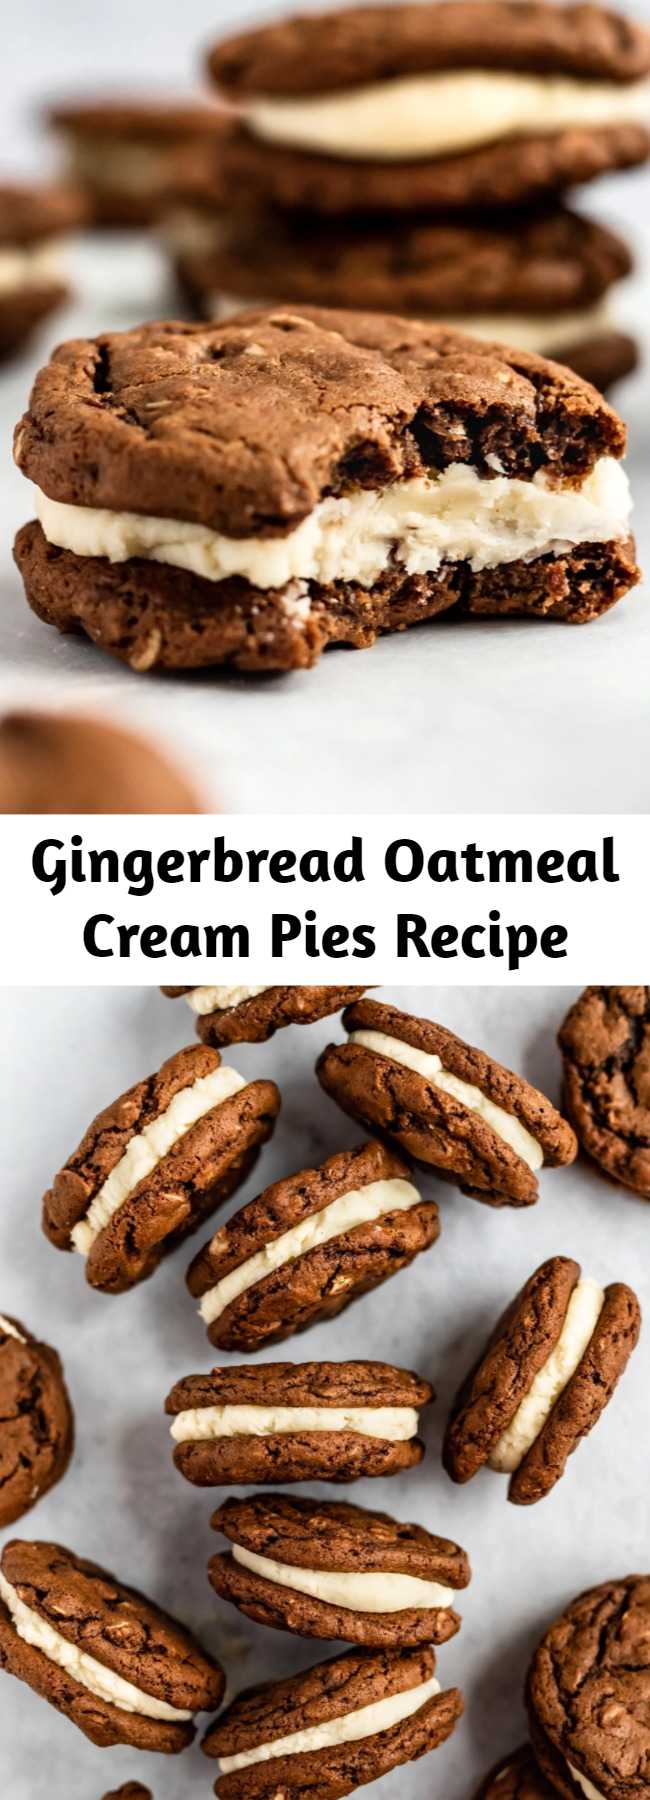 Gingerbread Oatmeal Cream Pies Recipe - Amazing oatmeal cream pies with a gingerbread twist! These perfectly spiced gingerbread oatmeal cookies are sandwiched together with a delicious thick cream filling for the ultimate holiday cookie sandwich. #oatmealcookies #cookies #cookierecipe #baking